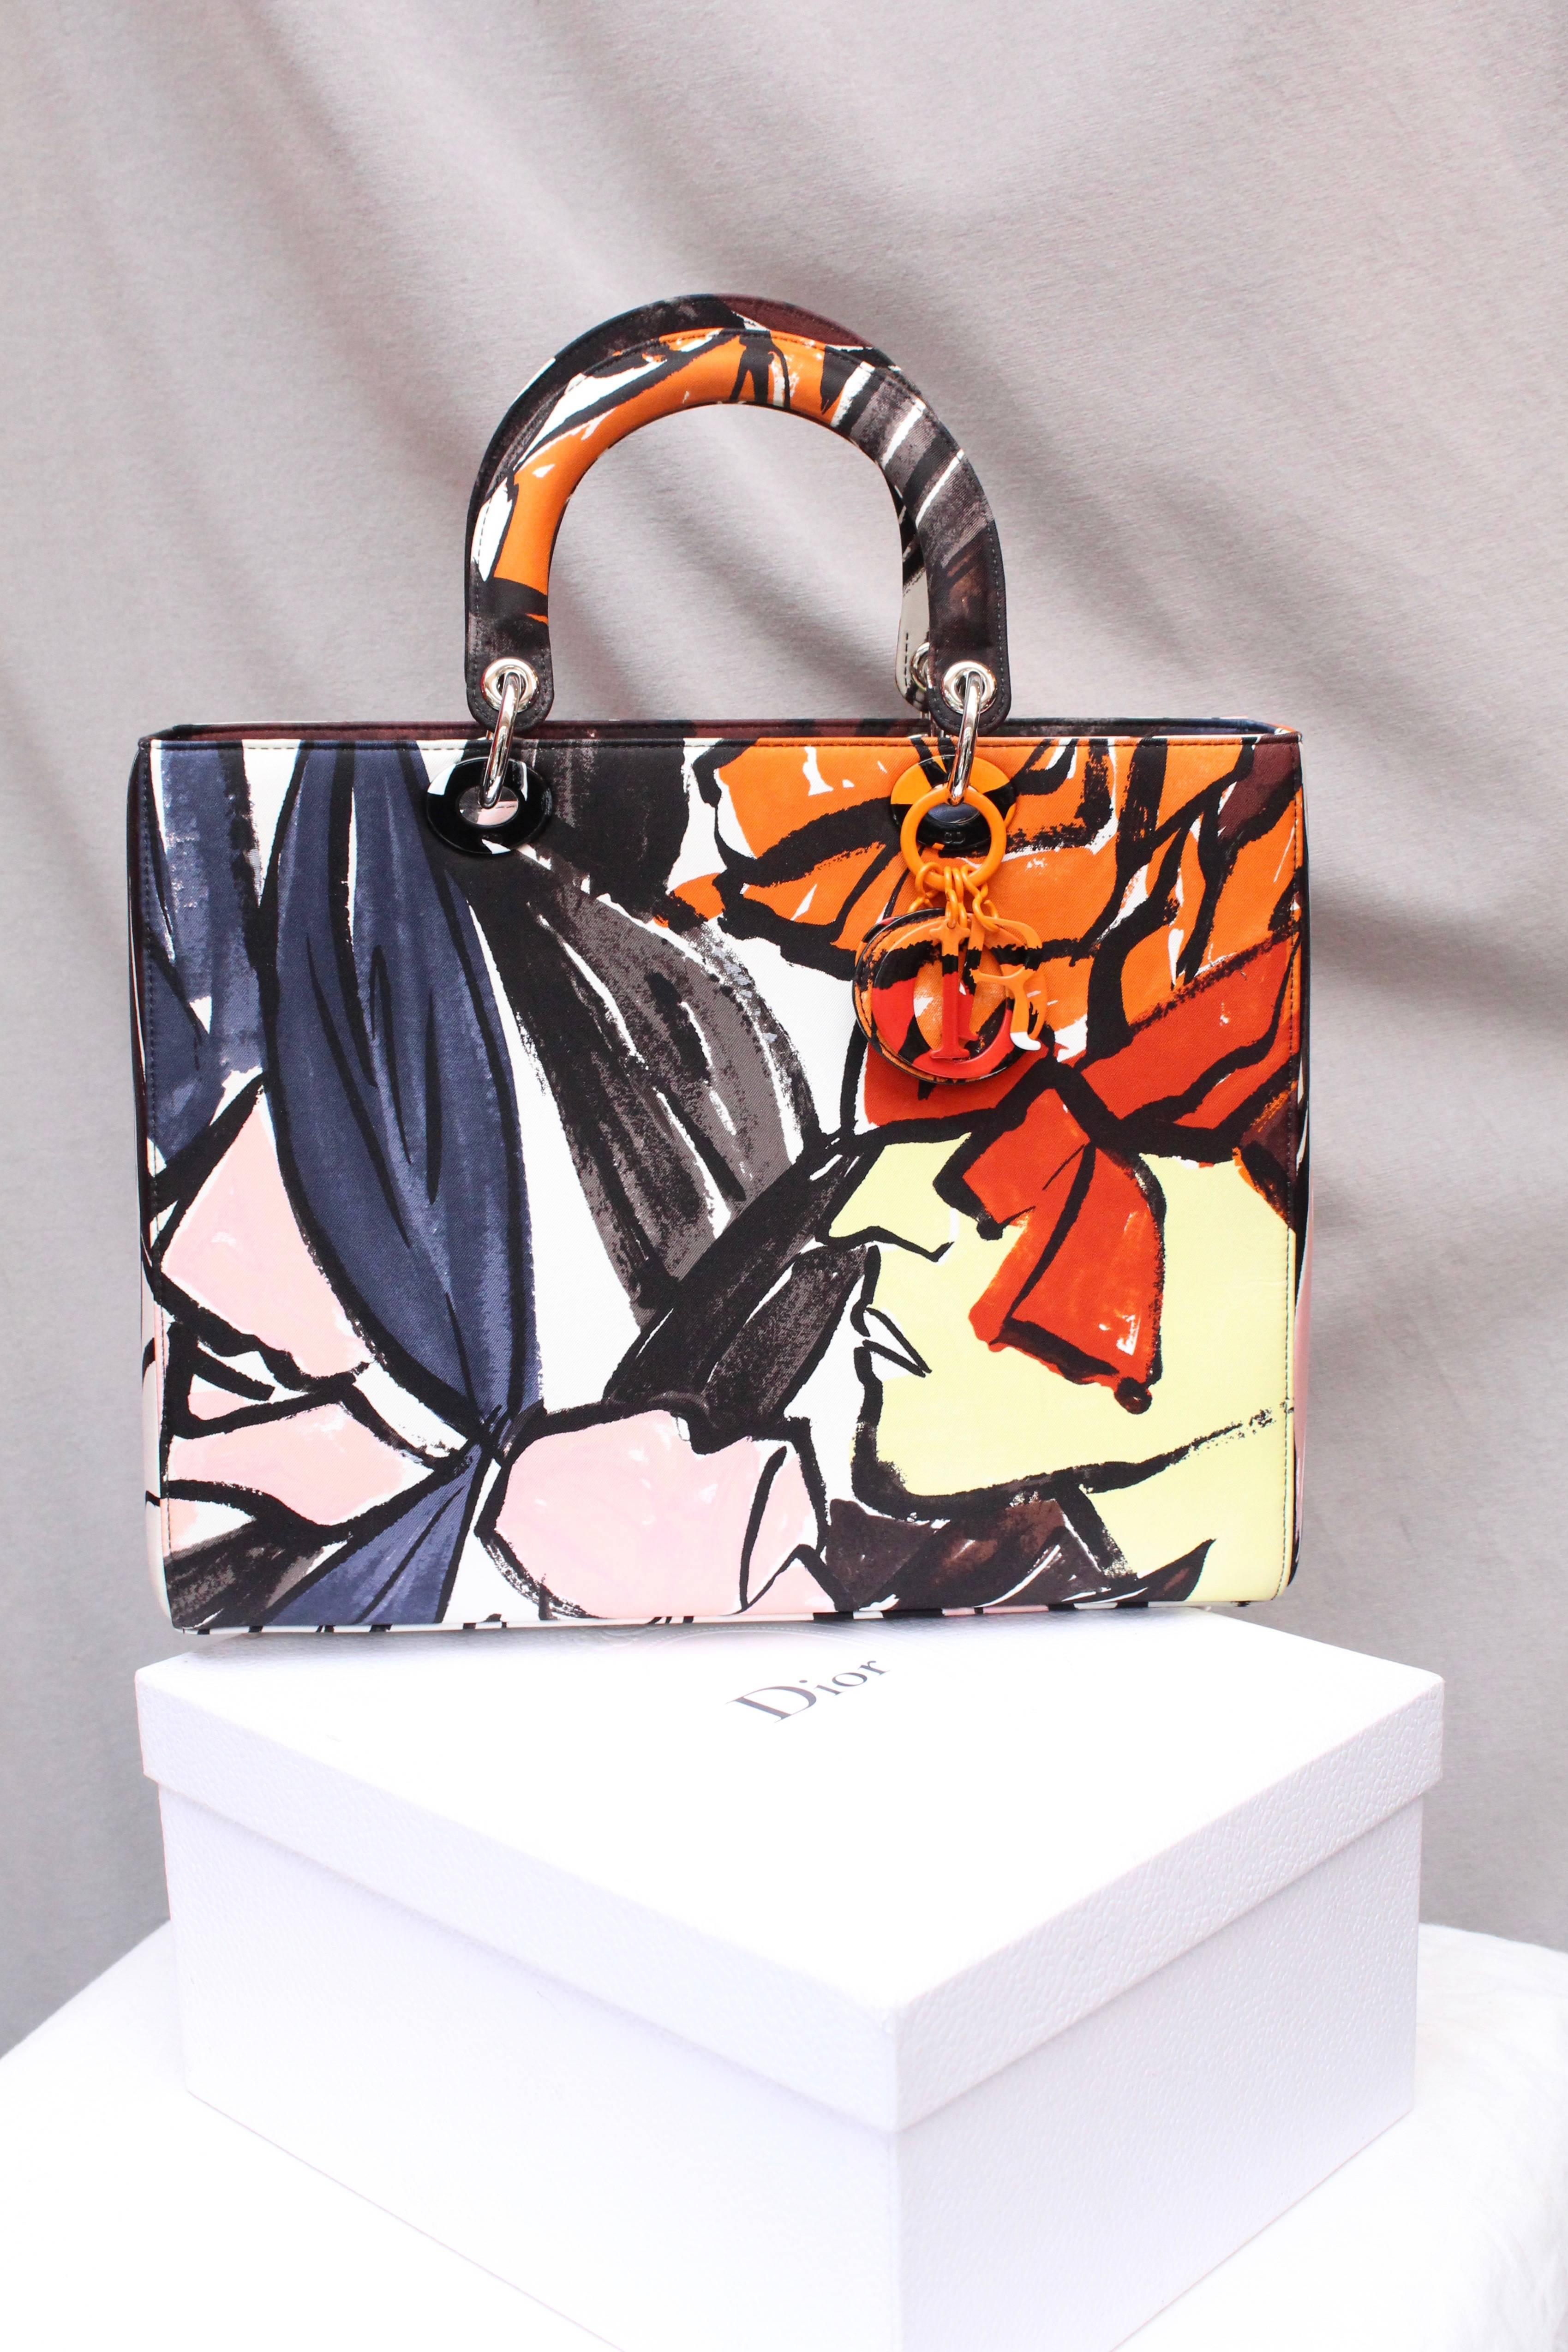 CHRISTIAN DIOR (Made in Italy) Large canvas Lady Dior Floral Graffiti Limited Edition by Raf Simons. It can be worn over the shoulder thanks to ots removable shoulder strap, or by hand. A colored metal key holder representing the brand initials